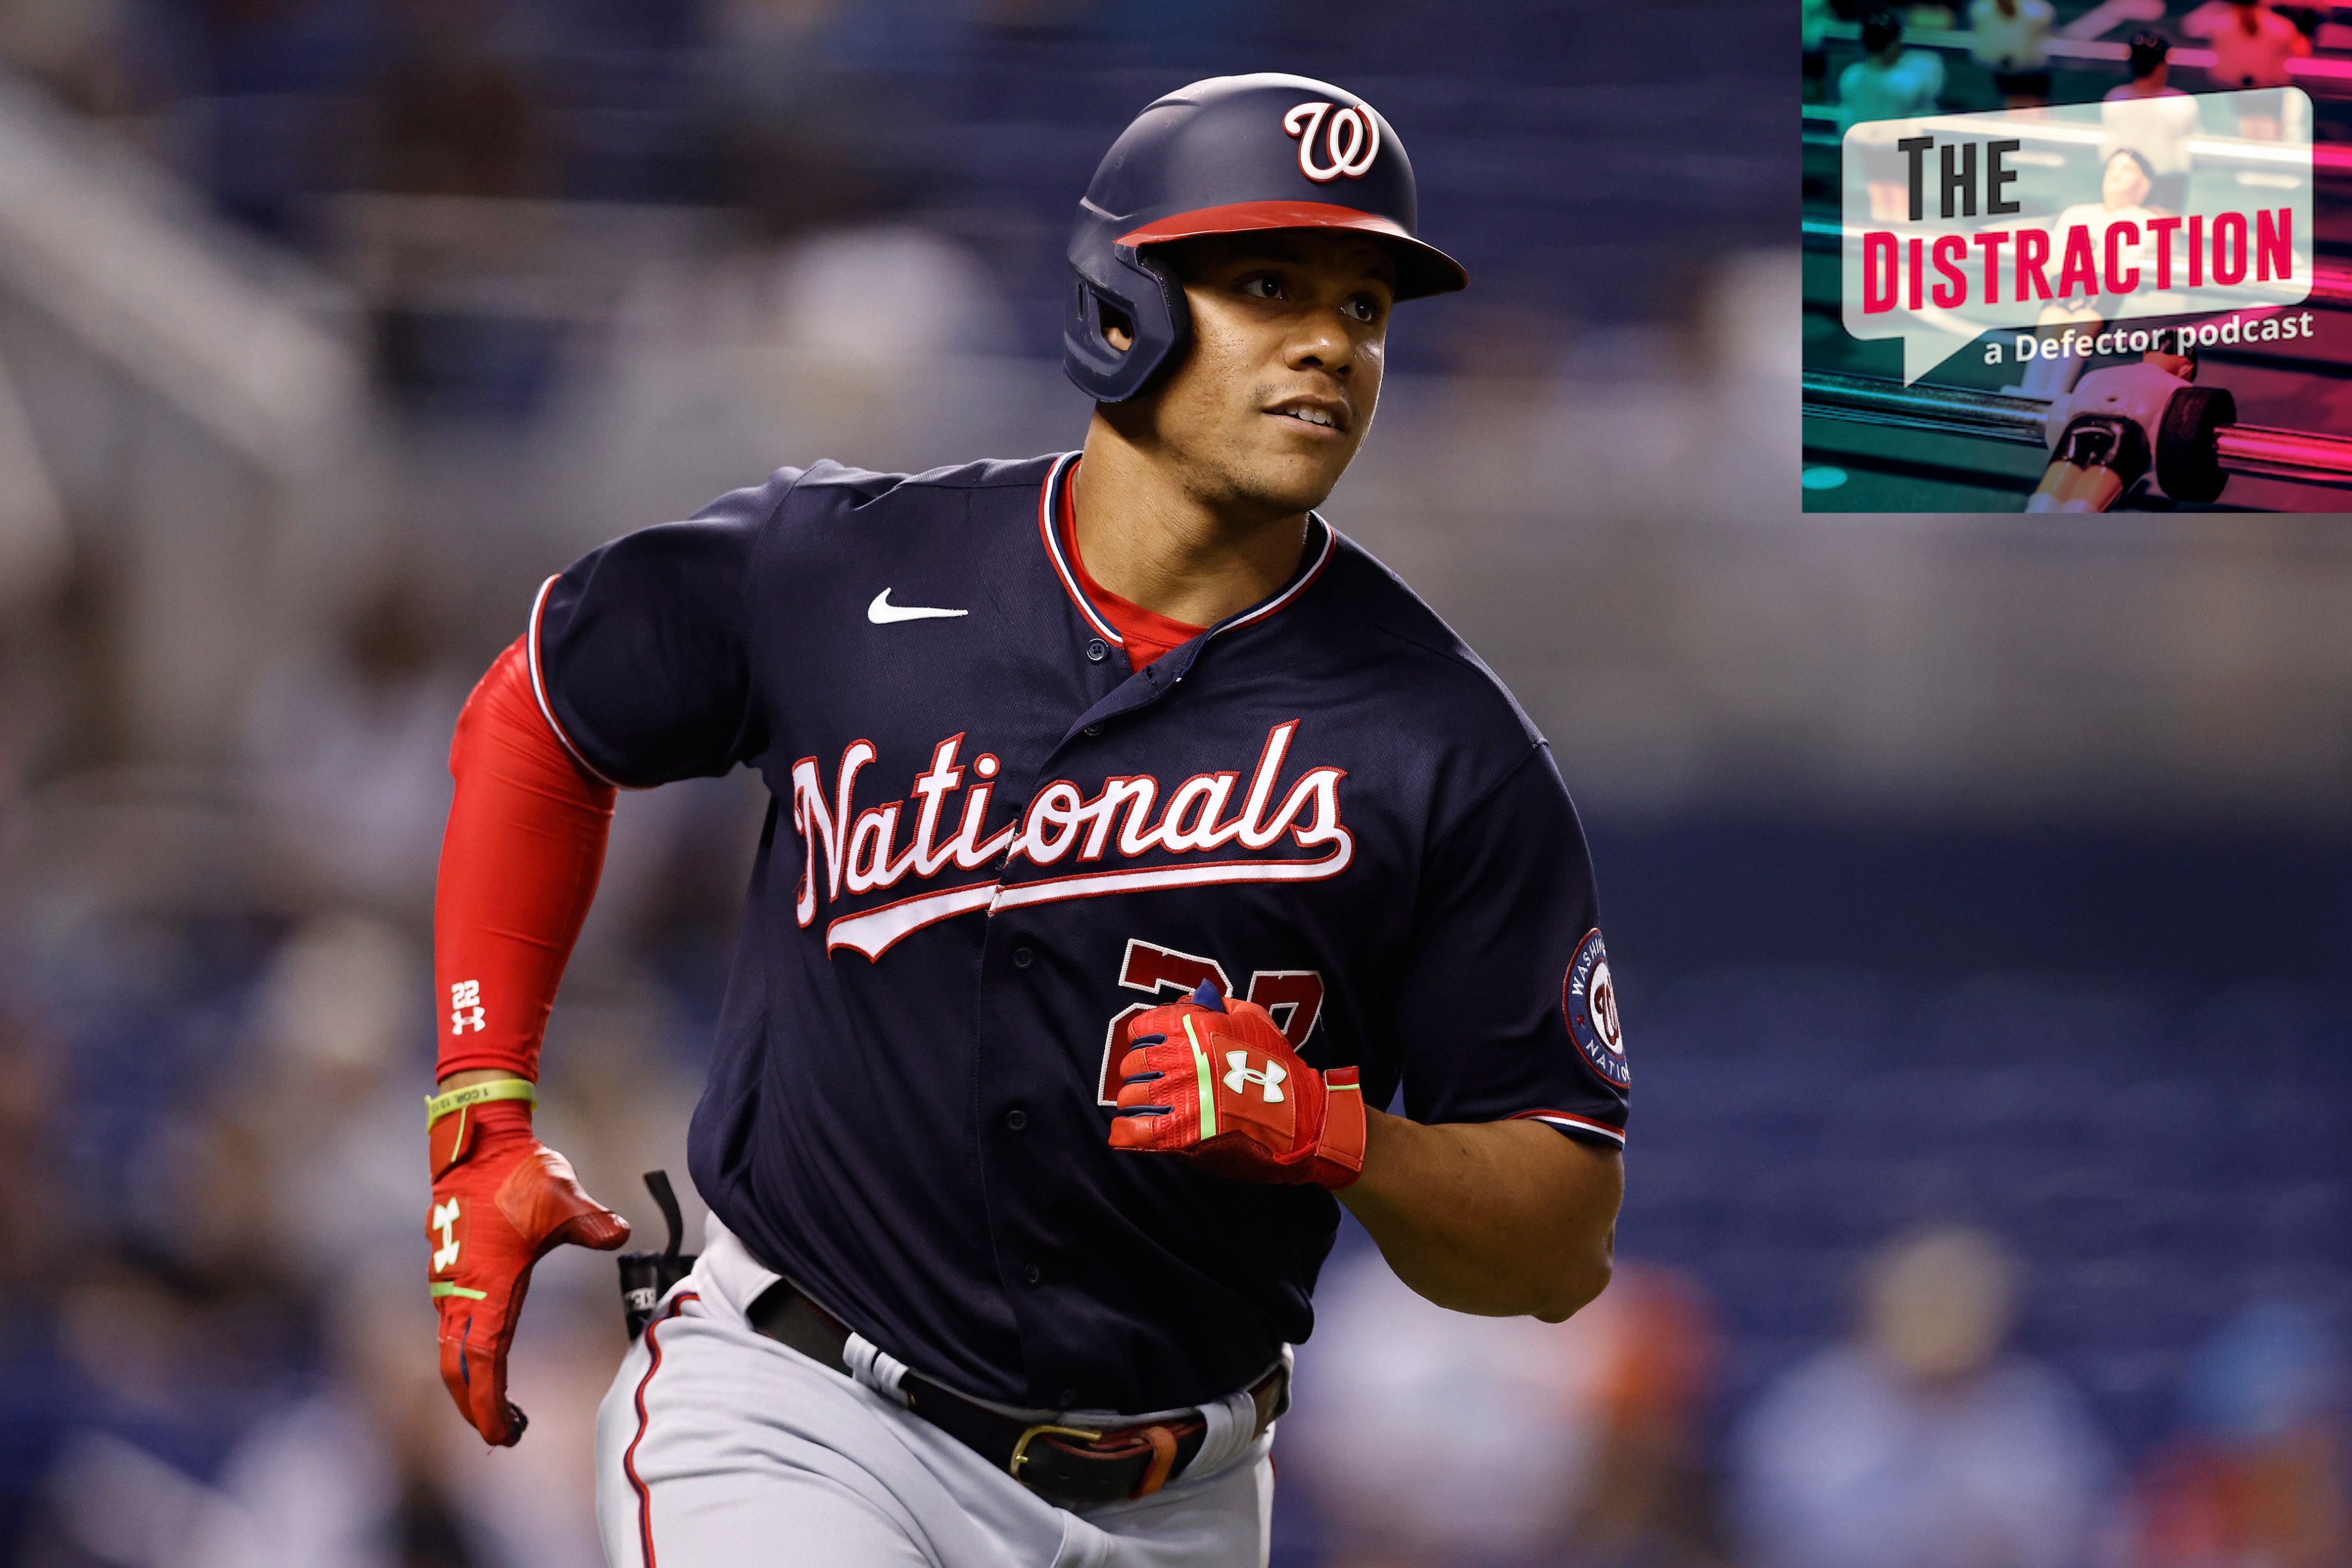 Juan Soto after hitting a home run against the Marlins in September of 2021, also seemingly looking at the Distraction logo.